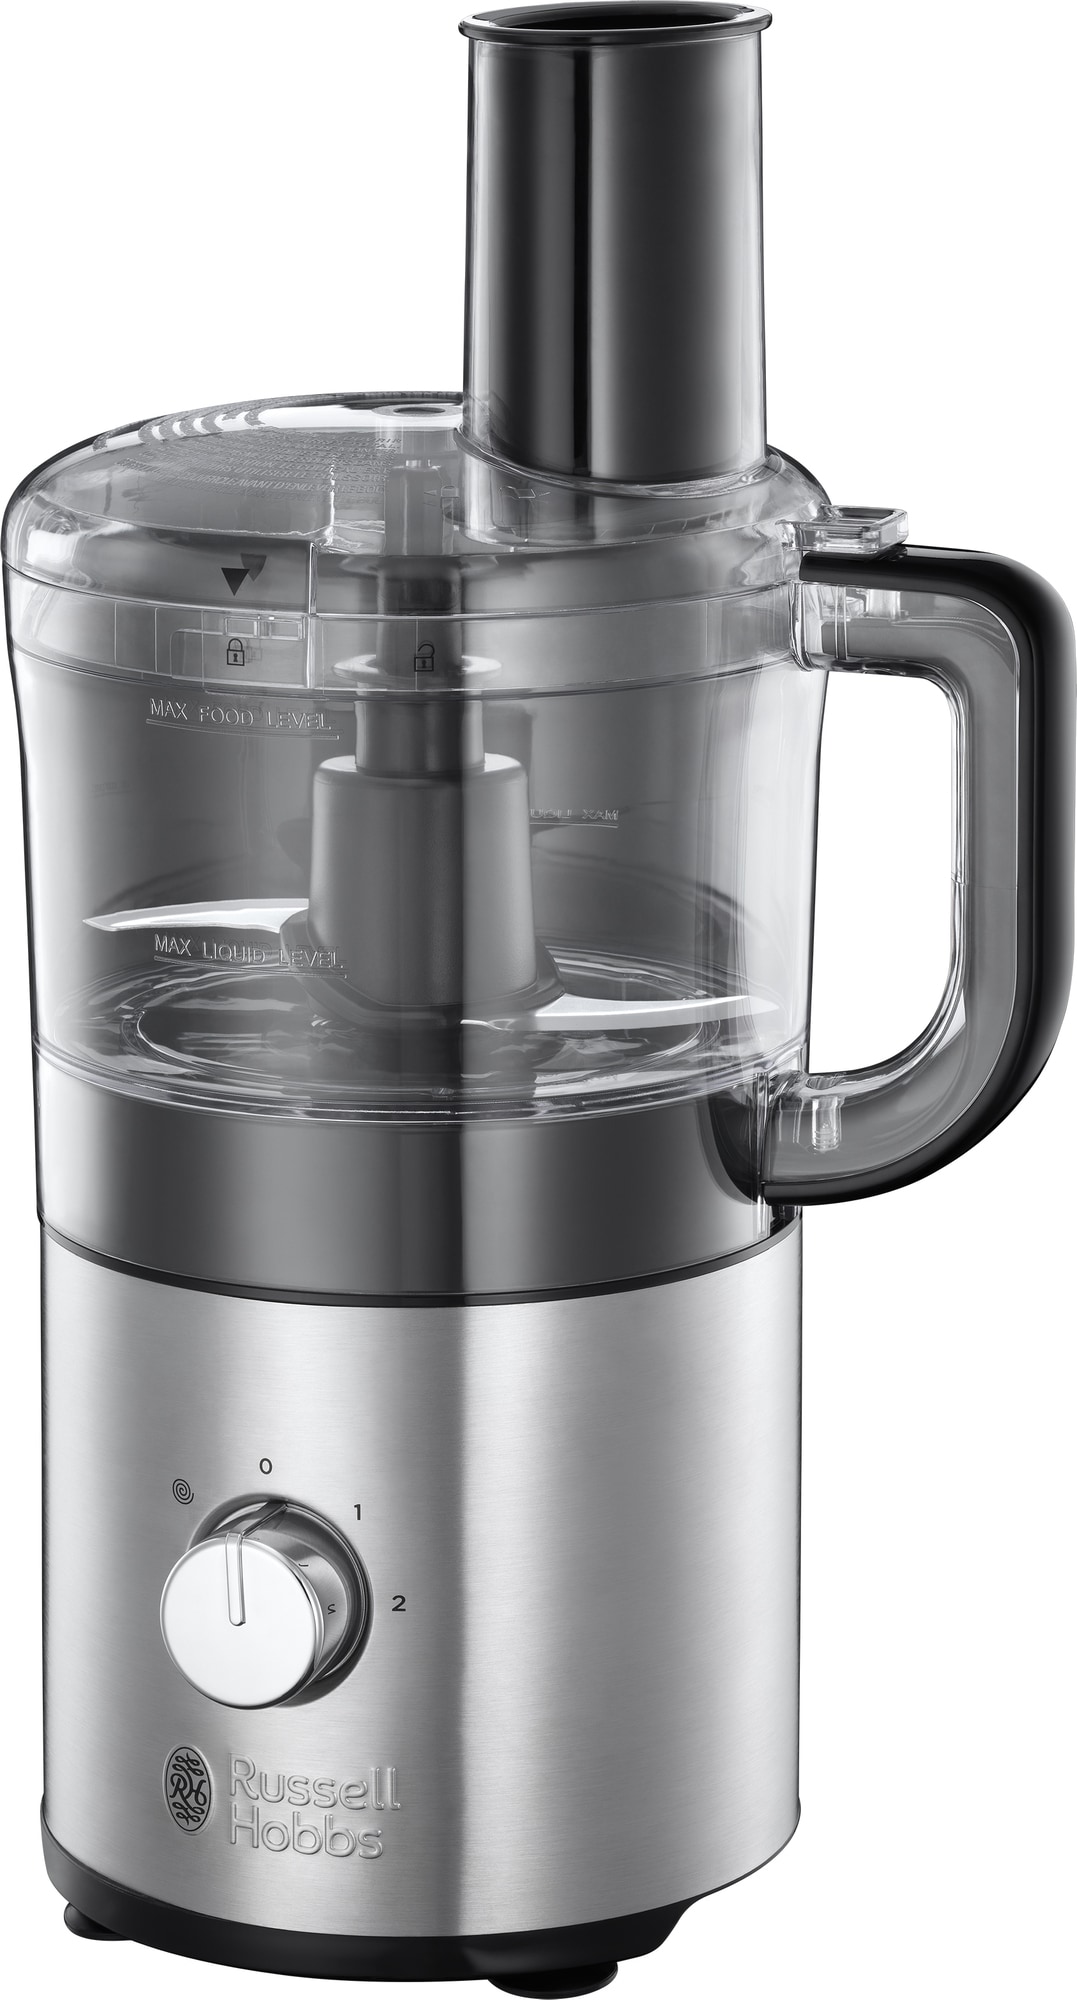 Russell Hobbs Compact Home foodprocessor 25280-56 thumbnail